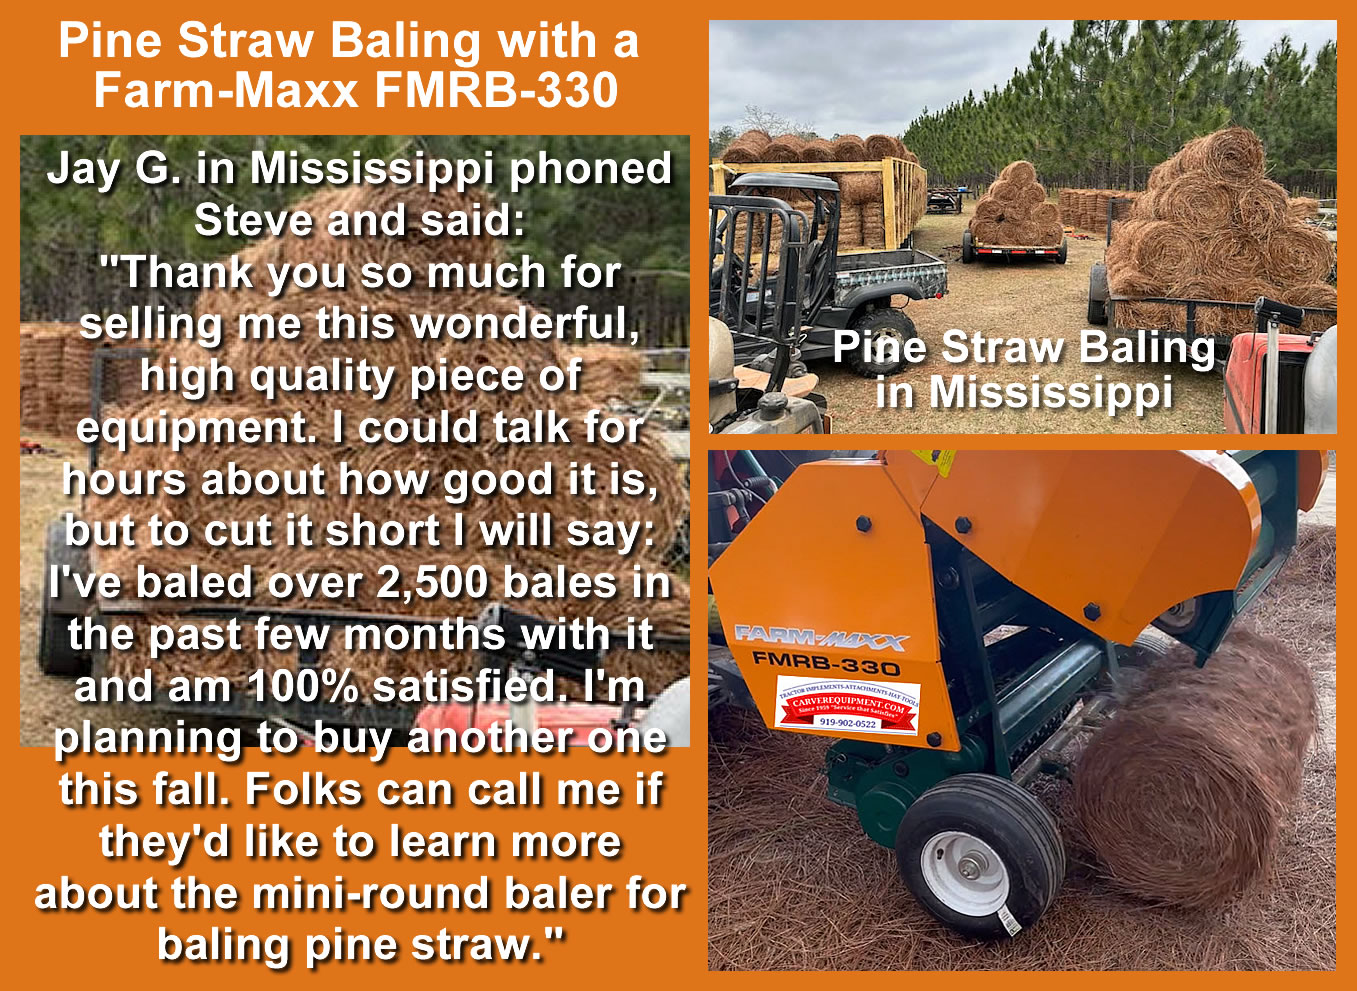 Pine Straw Baling in Mississippi with FMRB-330